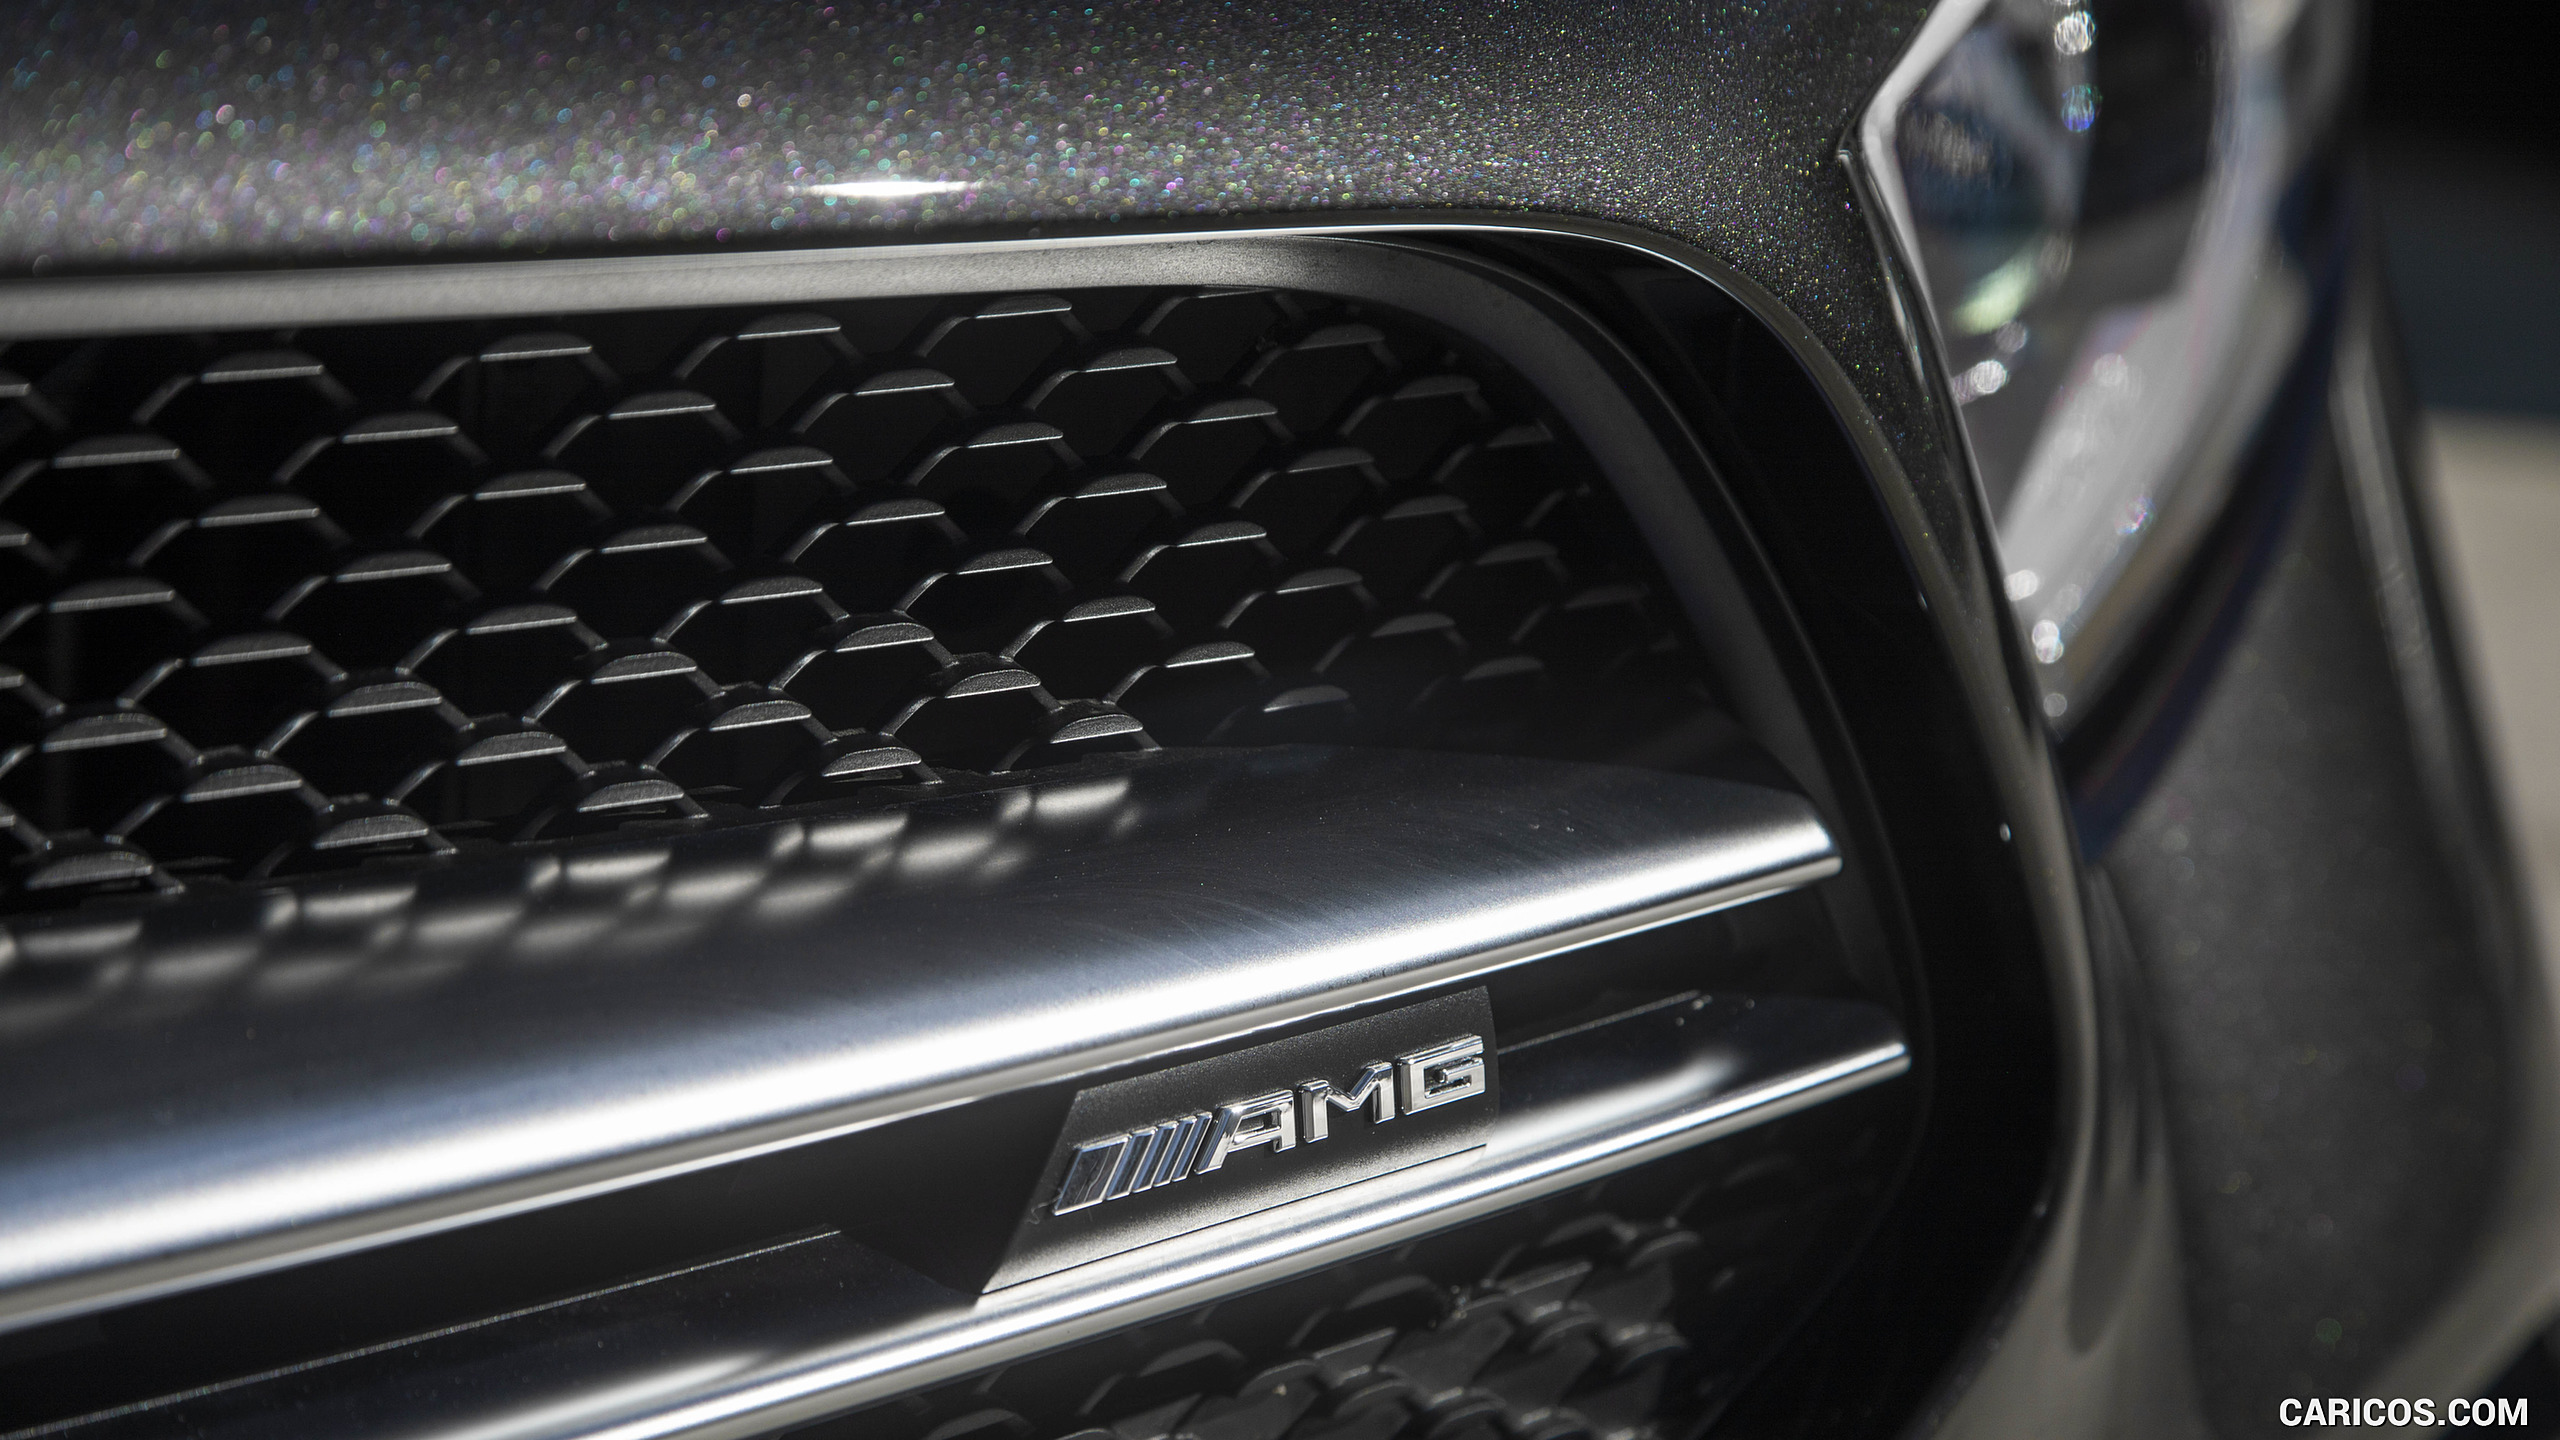 2019 Mercedes-AMG CLS 53 4MATIC+ (US-Spec) - Detail, #54 of 84